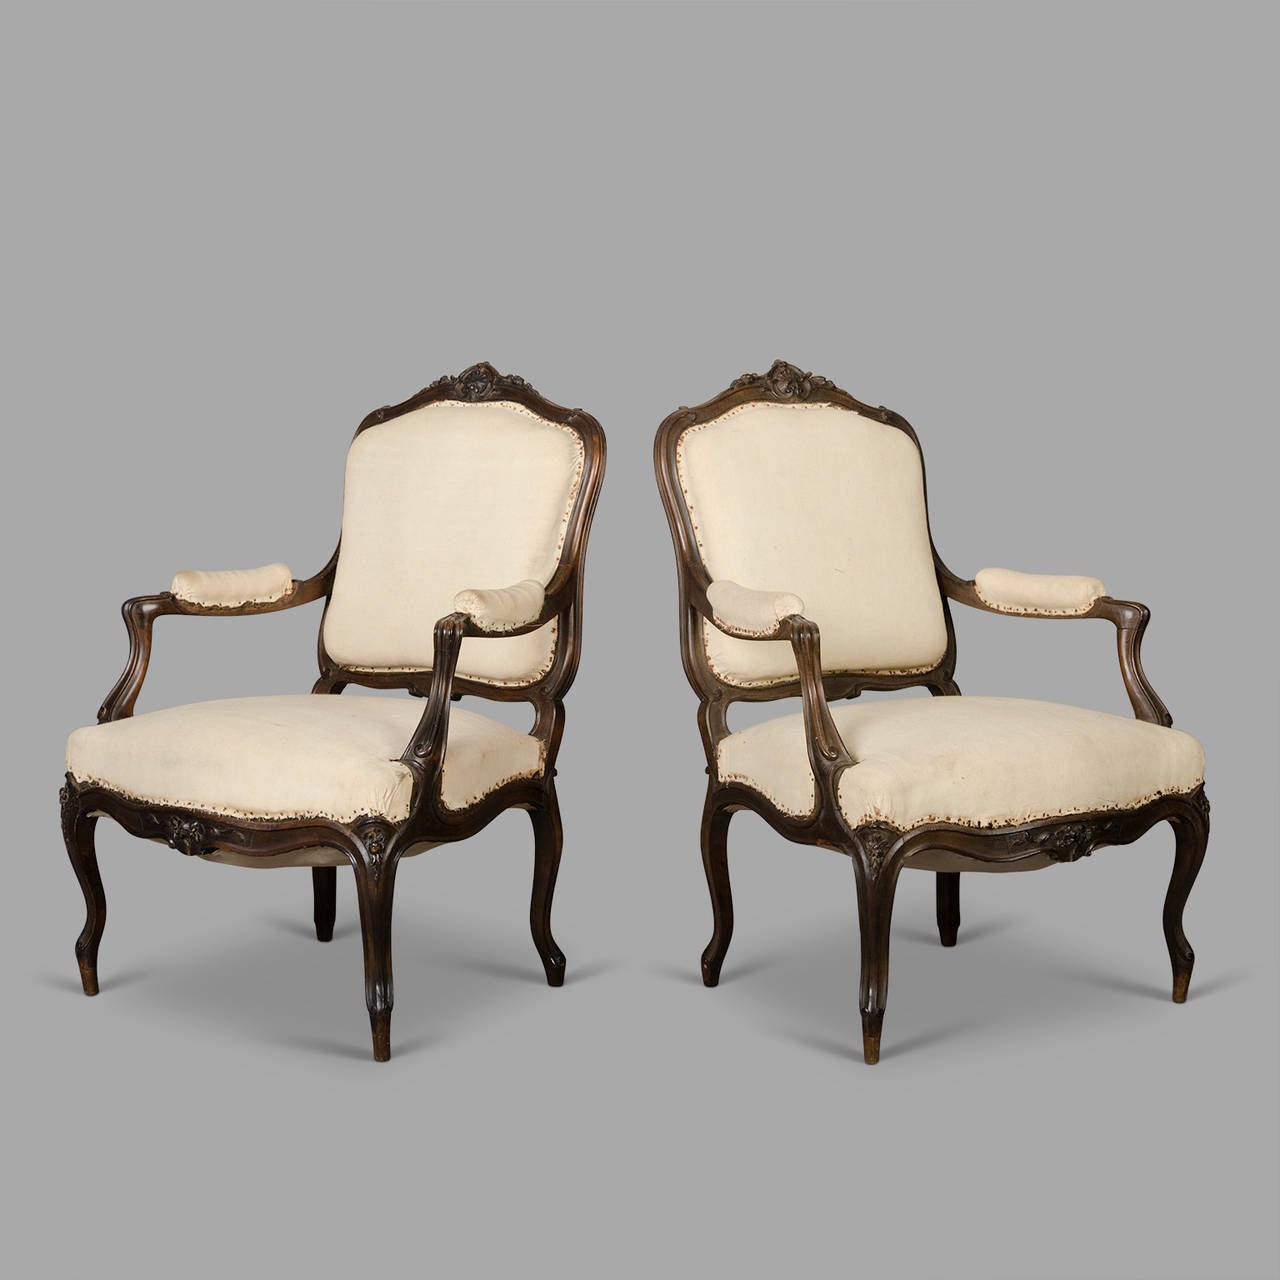 Pair of 19th Century (circa 1880) cabriolet armchairs with a fine carved decor enhanced with flowers and scrolls. Very good upholstery condition. Ready to be covered with new fabric.